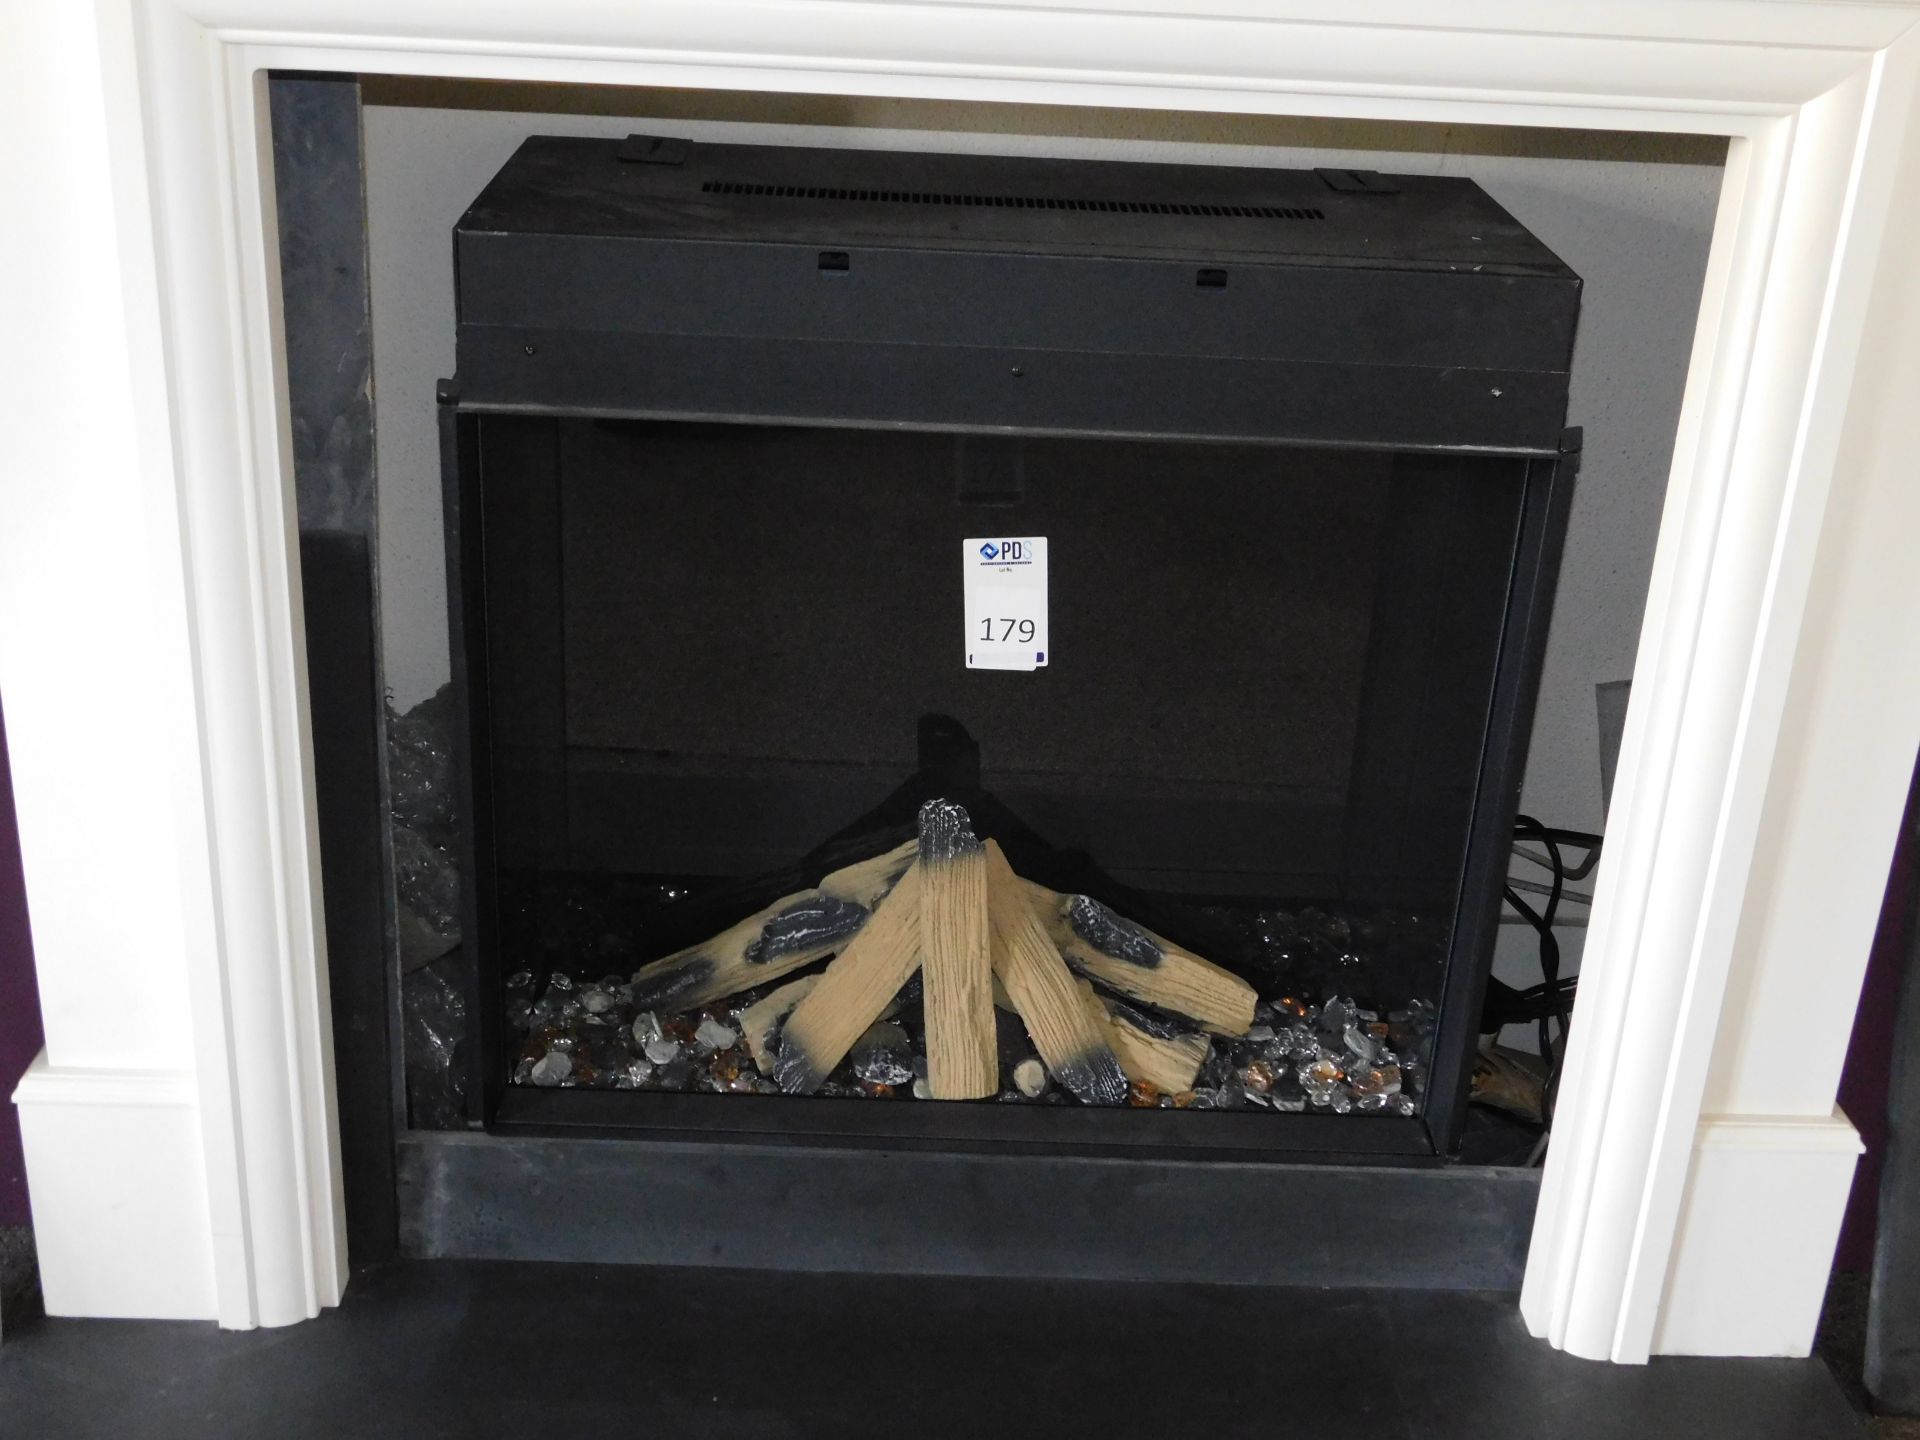 Ex-Display Solution SLE75 1-2kw Electric Fire with Remote (Where the company’s description/price